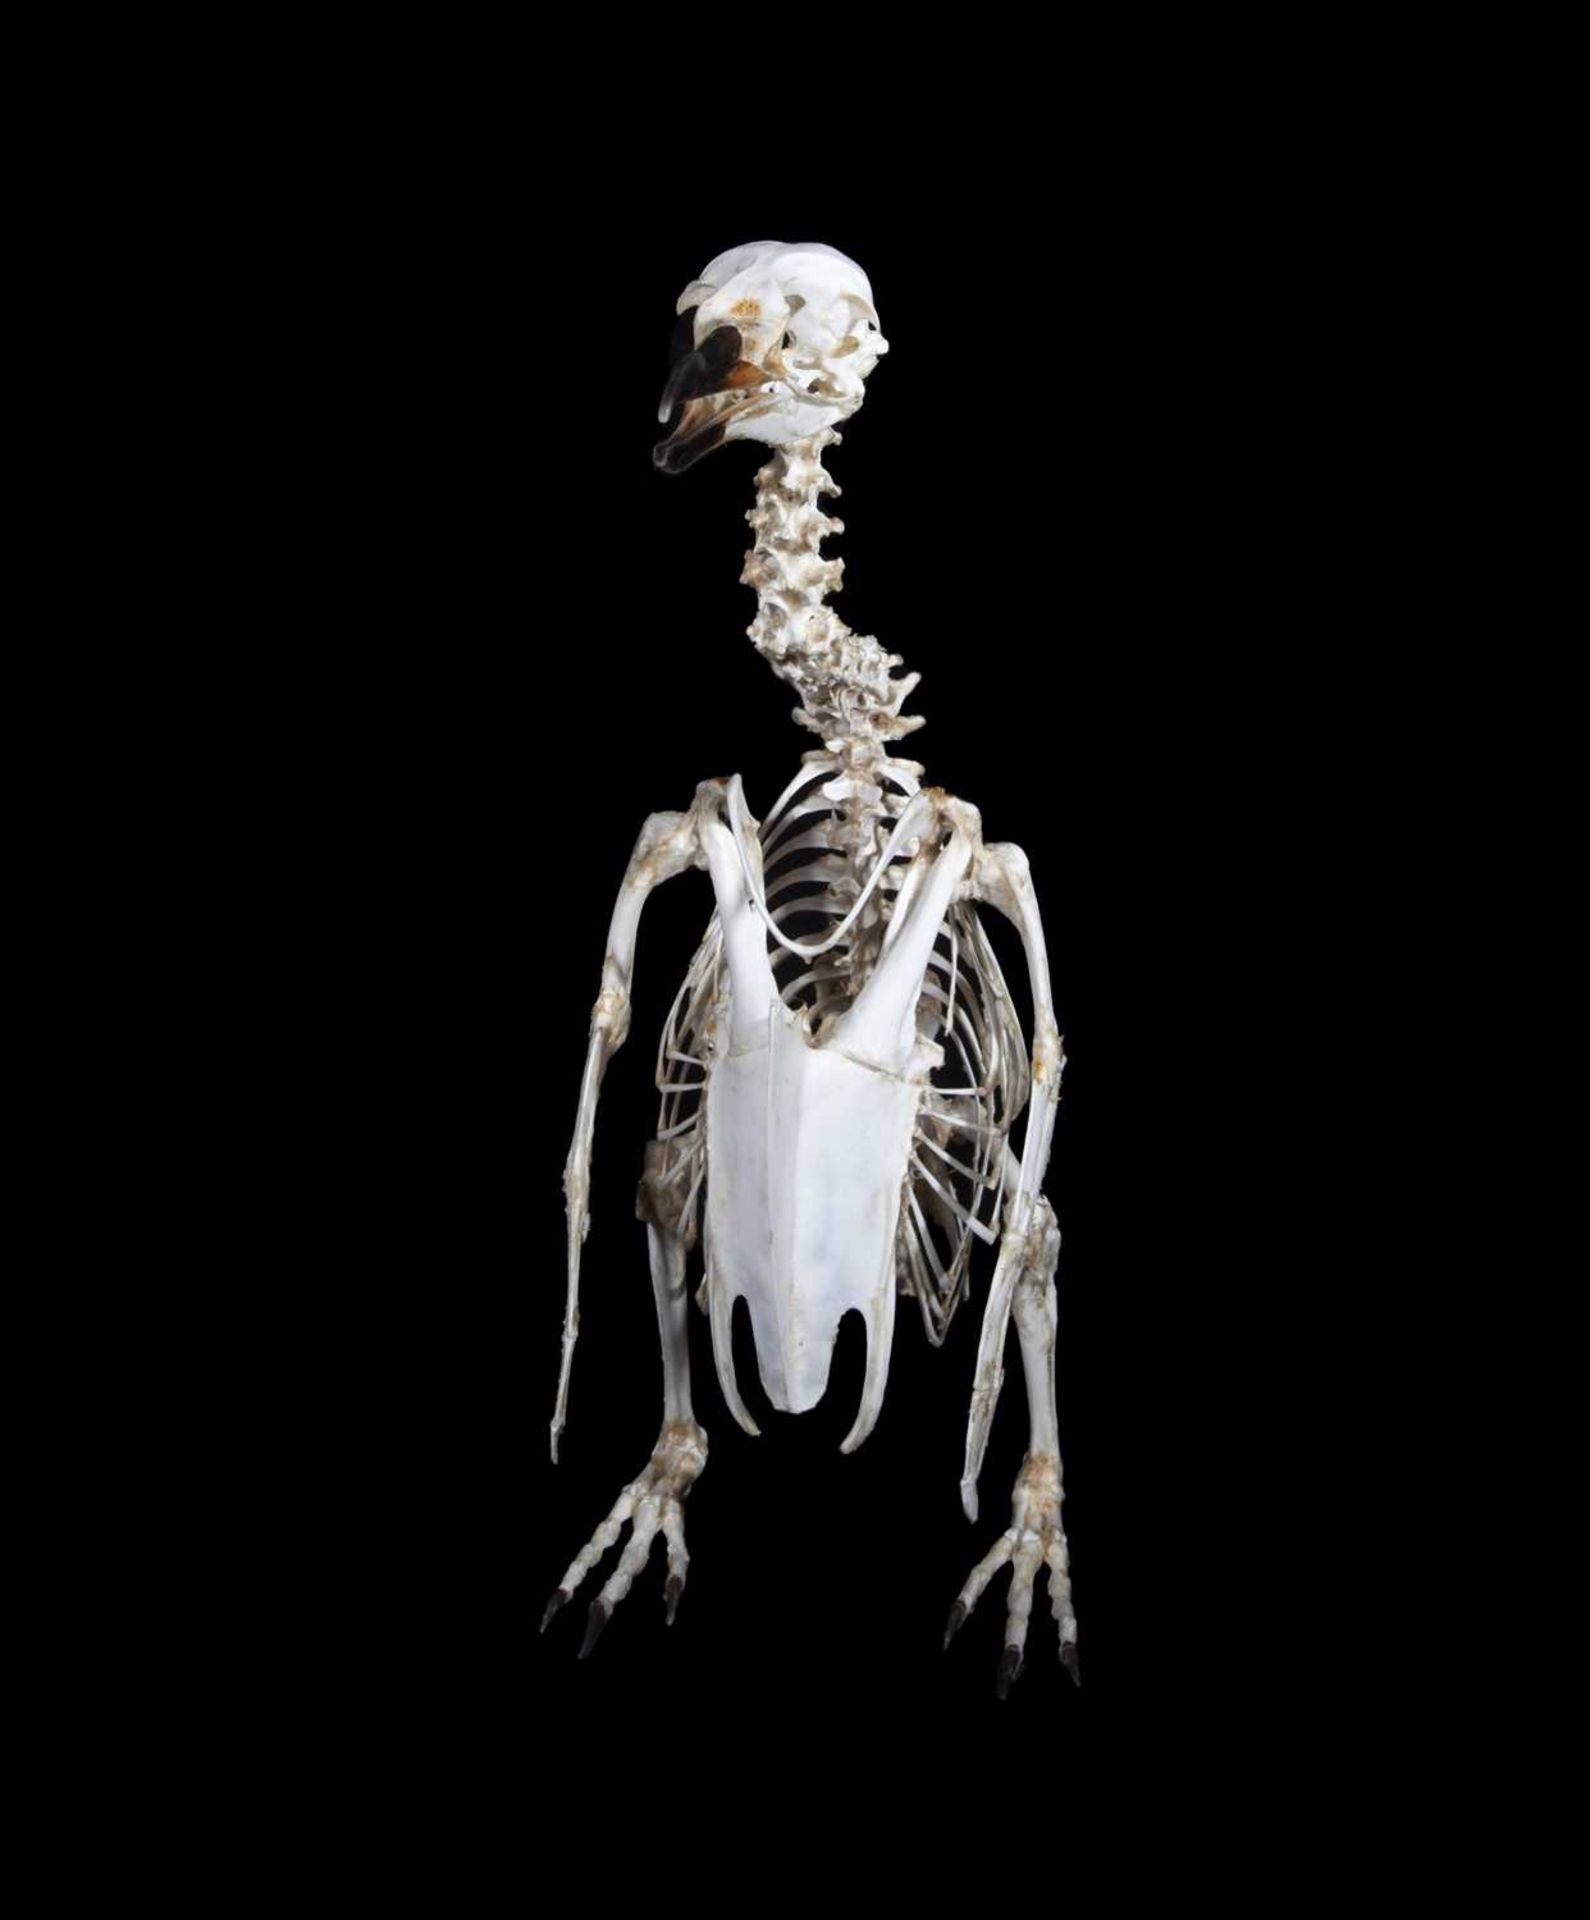 A TAXIDERMY / OSTEOLOGY PENGUIN SKELETON. - Image 8 of 8